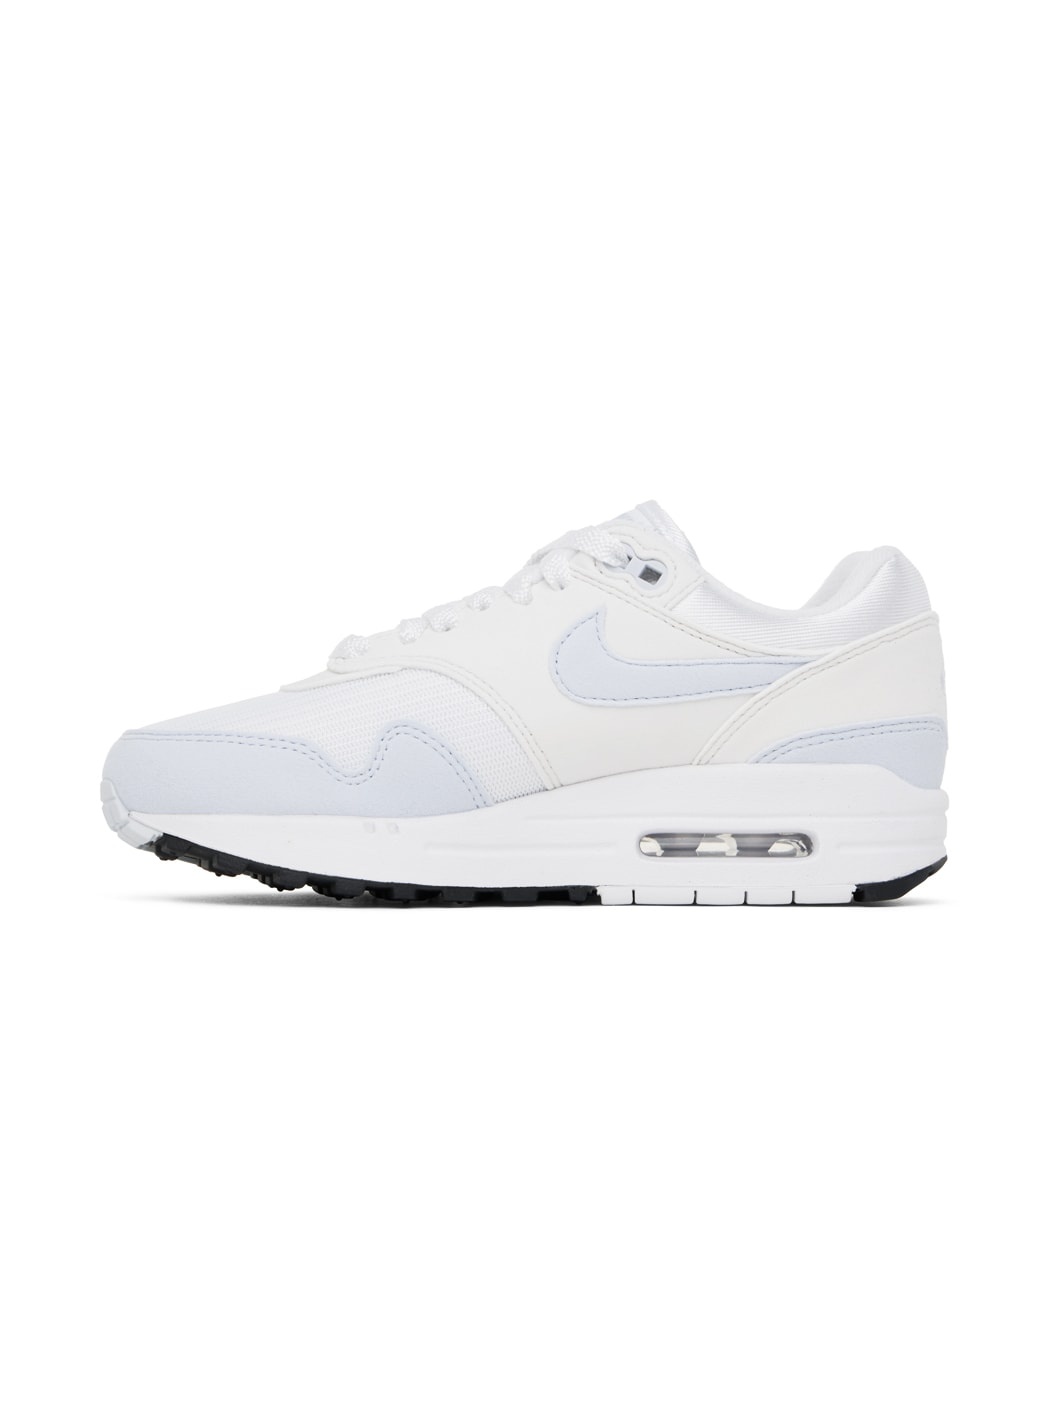 White & Blue Air Max 1 Sneakers - 3